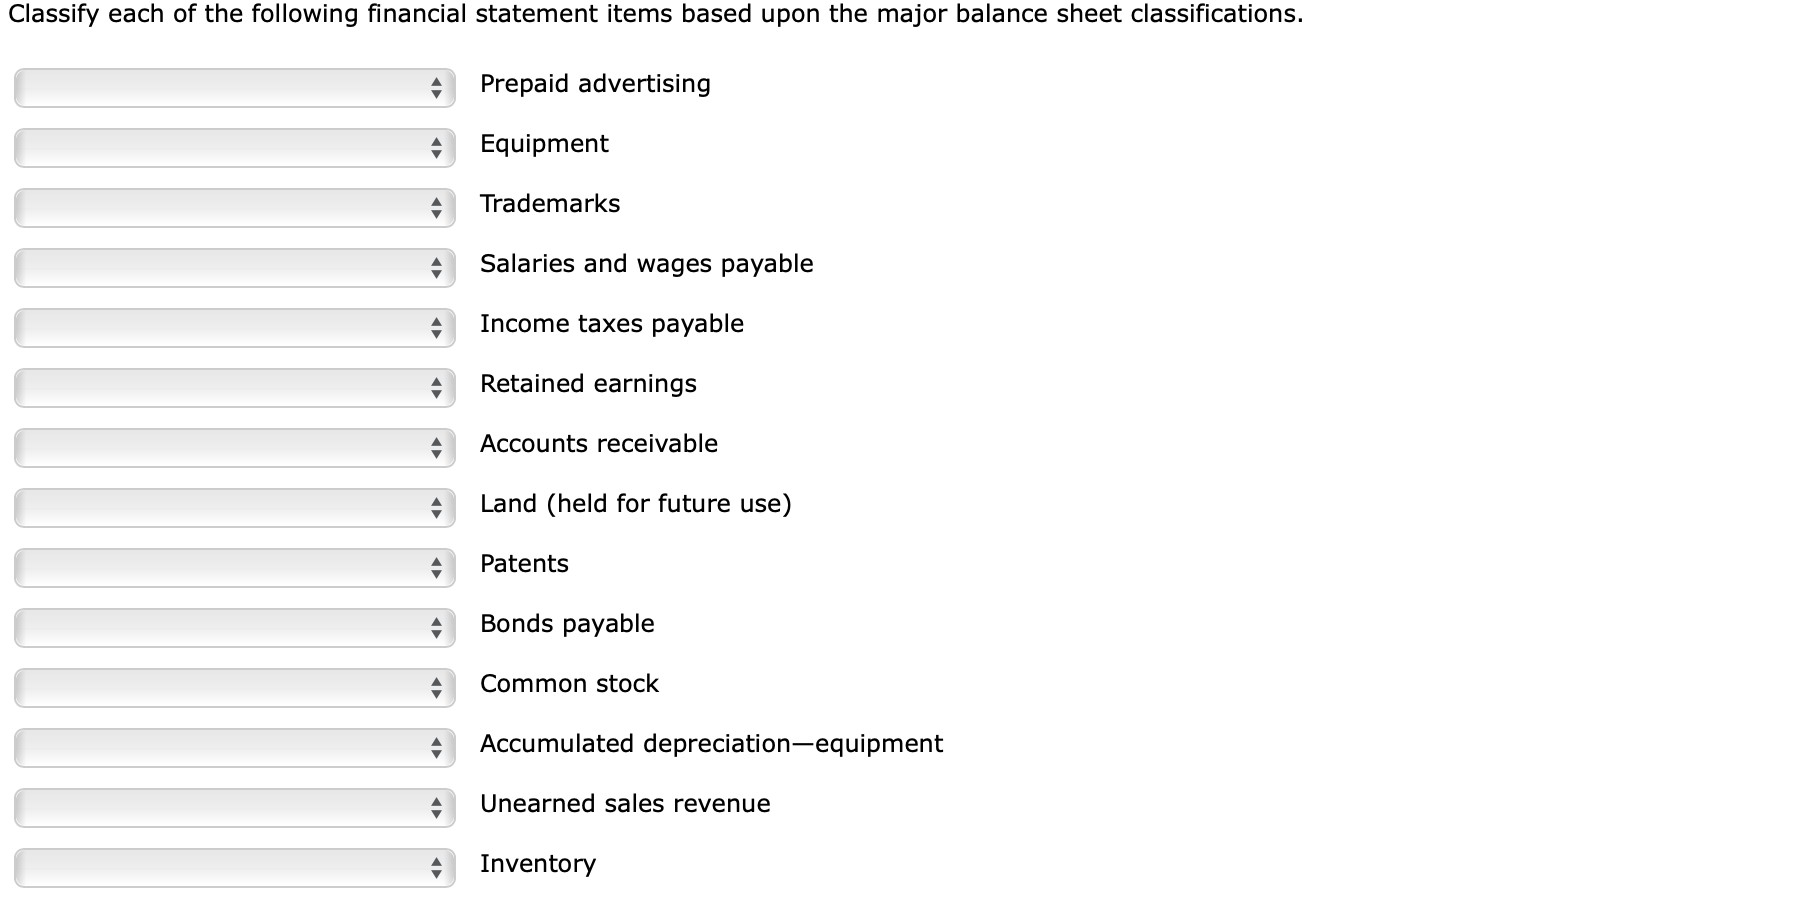 Classify each of the following financial statement items based upon the major balance sheet classifications.
Prepaid advertising
Equipment
Trademarks
Salaries and wages payable
Income taxes payable
Retained earnings
Accounts receivable
Land (held for future use)
Patents
Bonds payable
Common stock
Accumulated depreciation-equipment
Unearned sales revenue
Inventory
